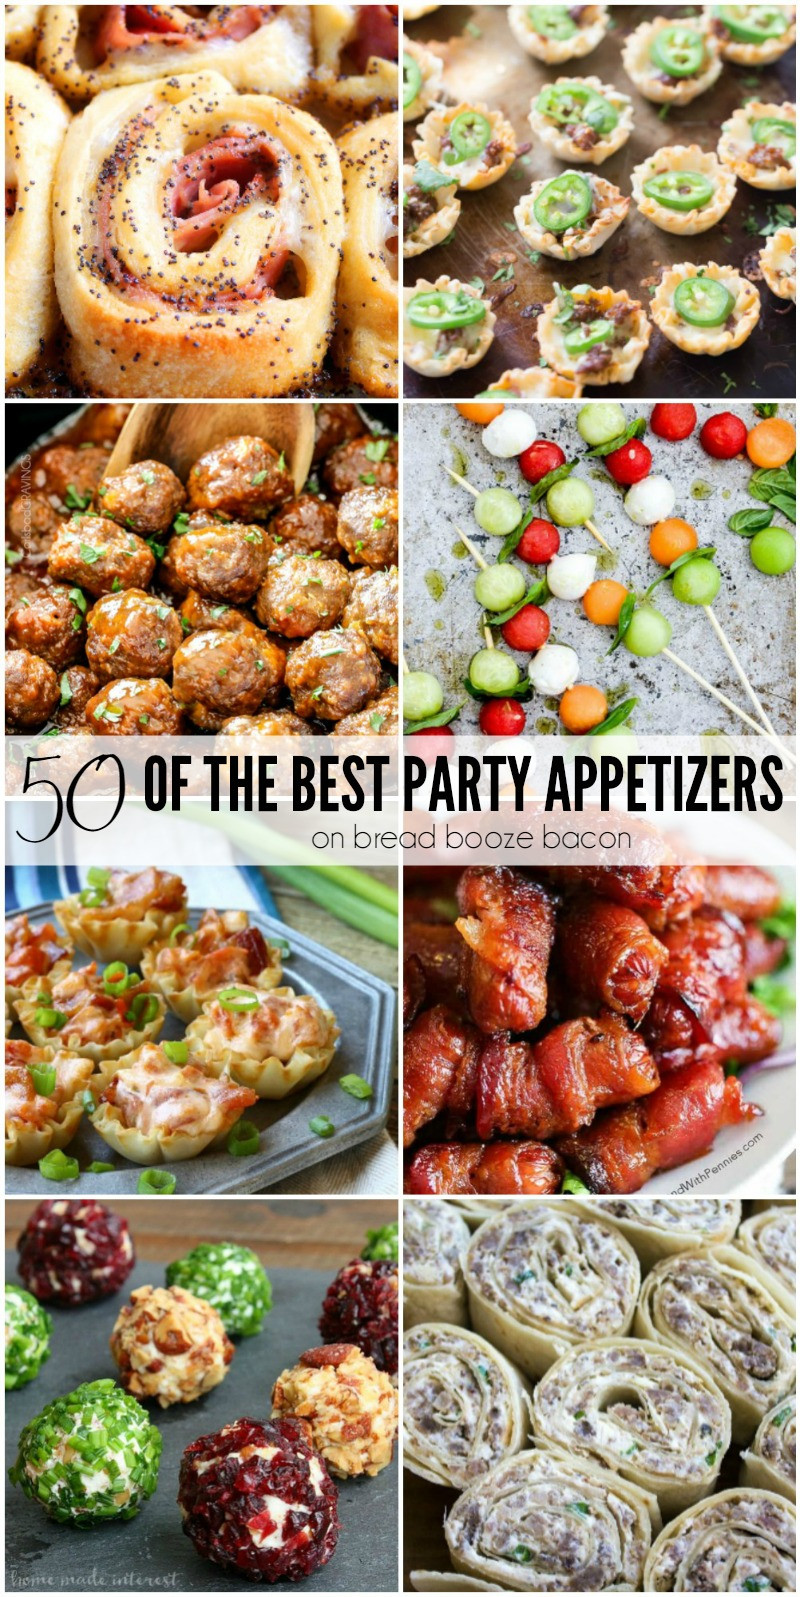 Appetizer Ideas For Dinner Party
 50 of the Best Party Appetizers • Bread Booze Bacon